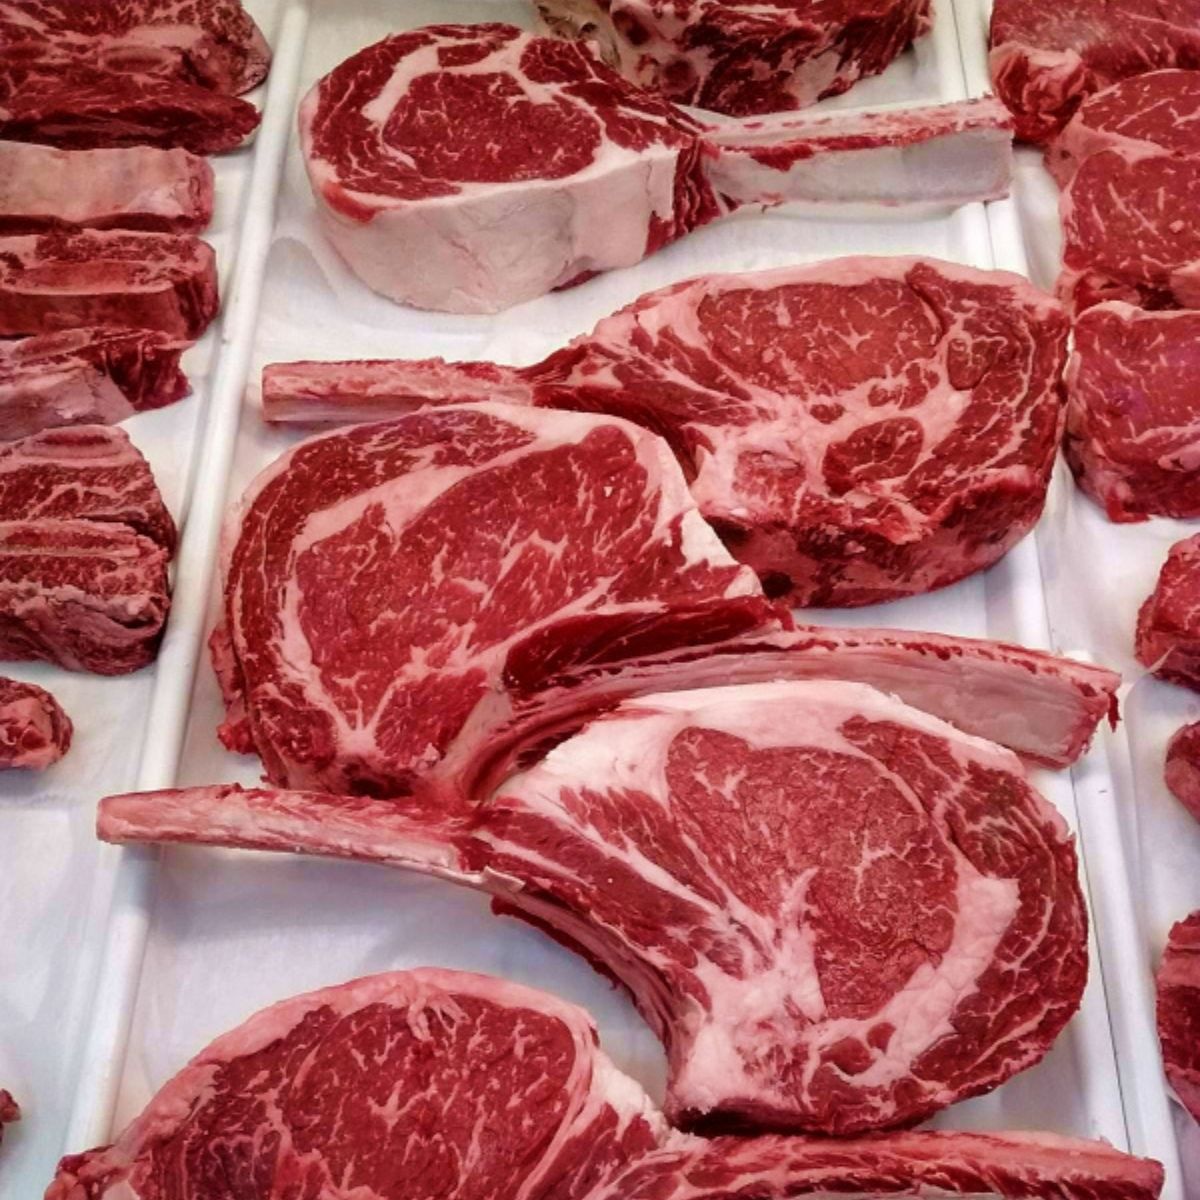 Ribeye steaks with large bones on display at a Costco store.